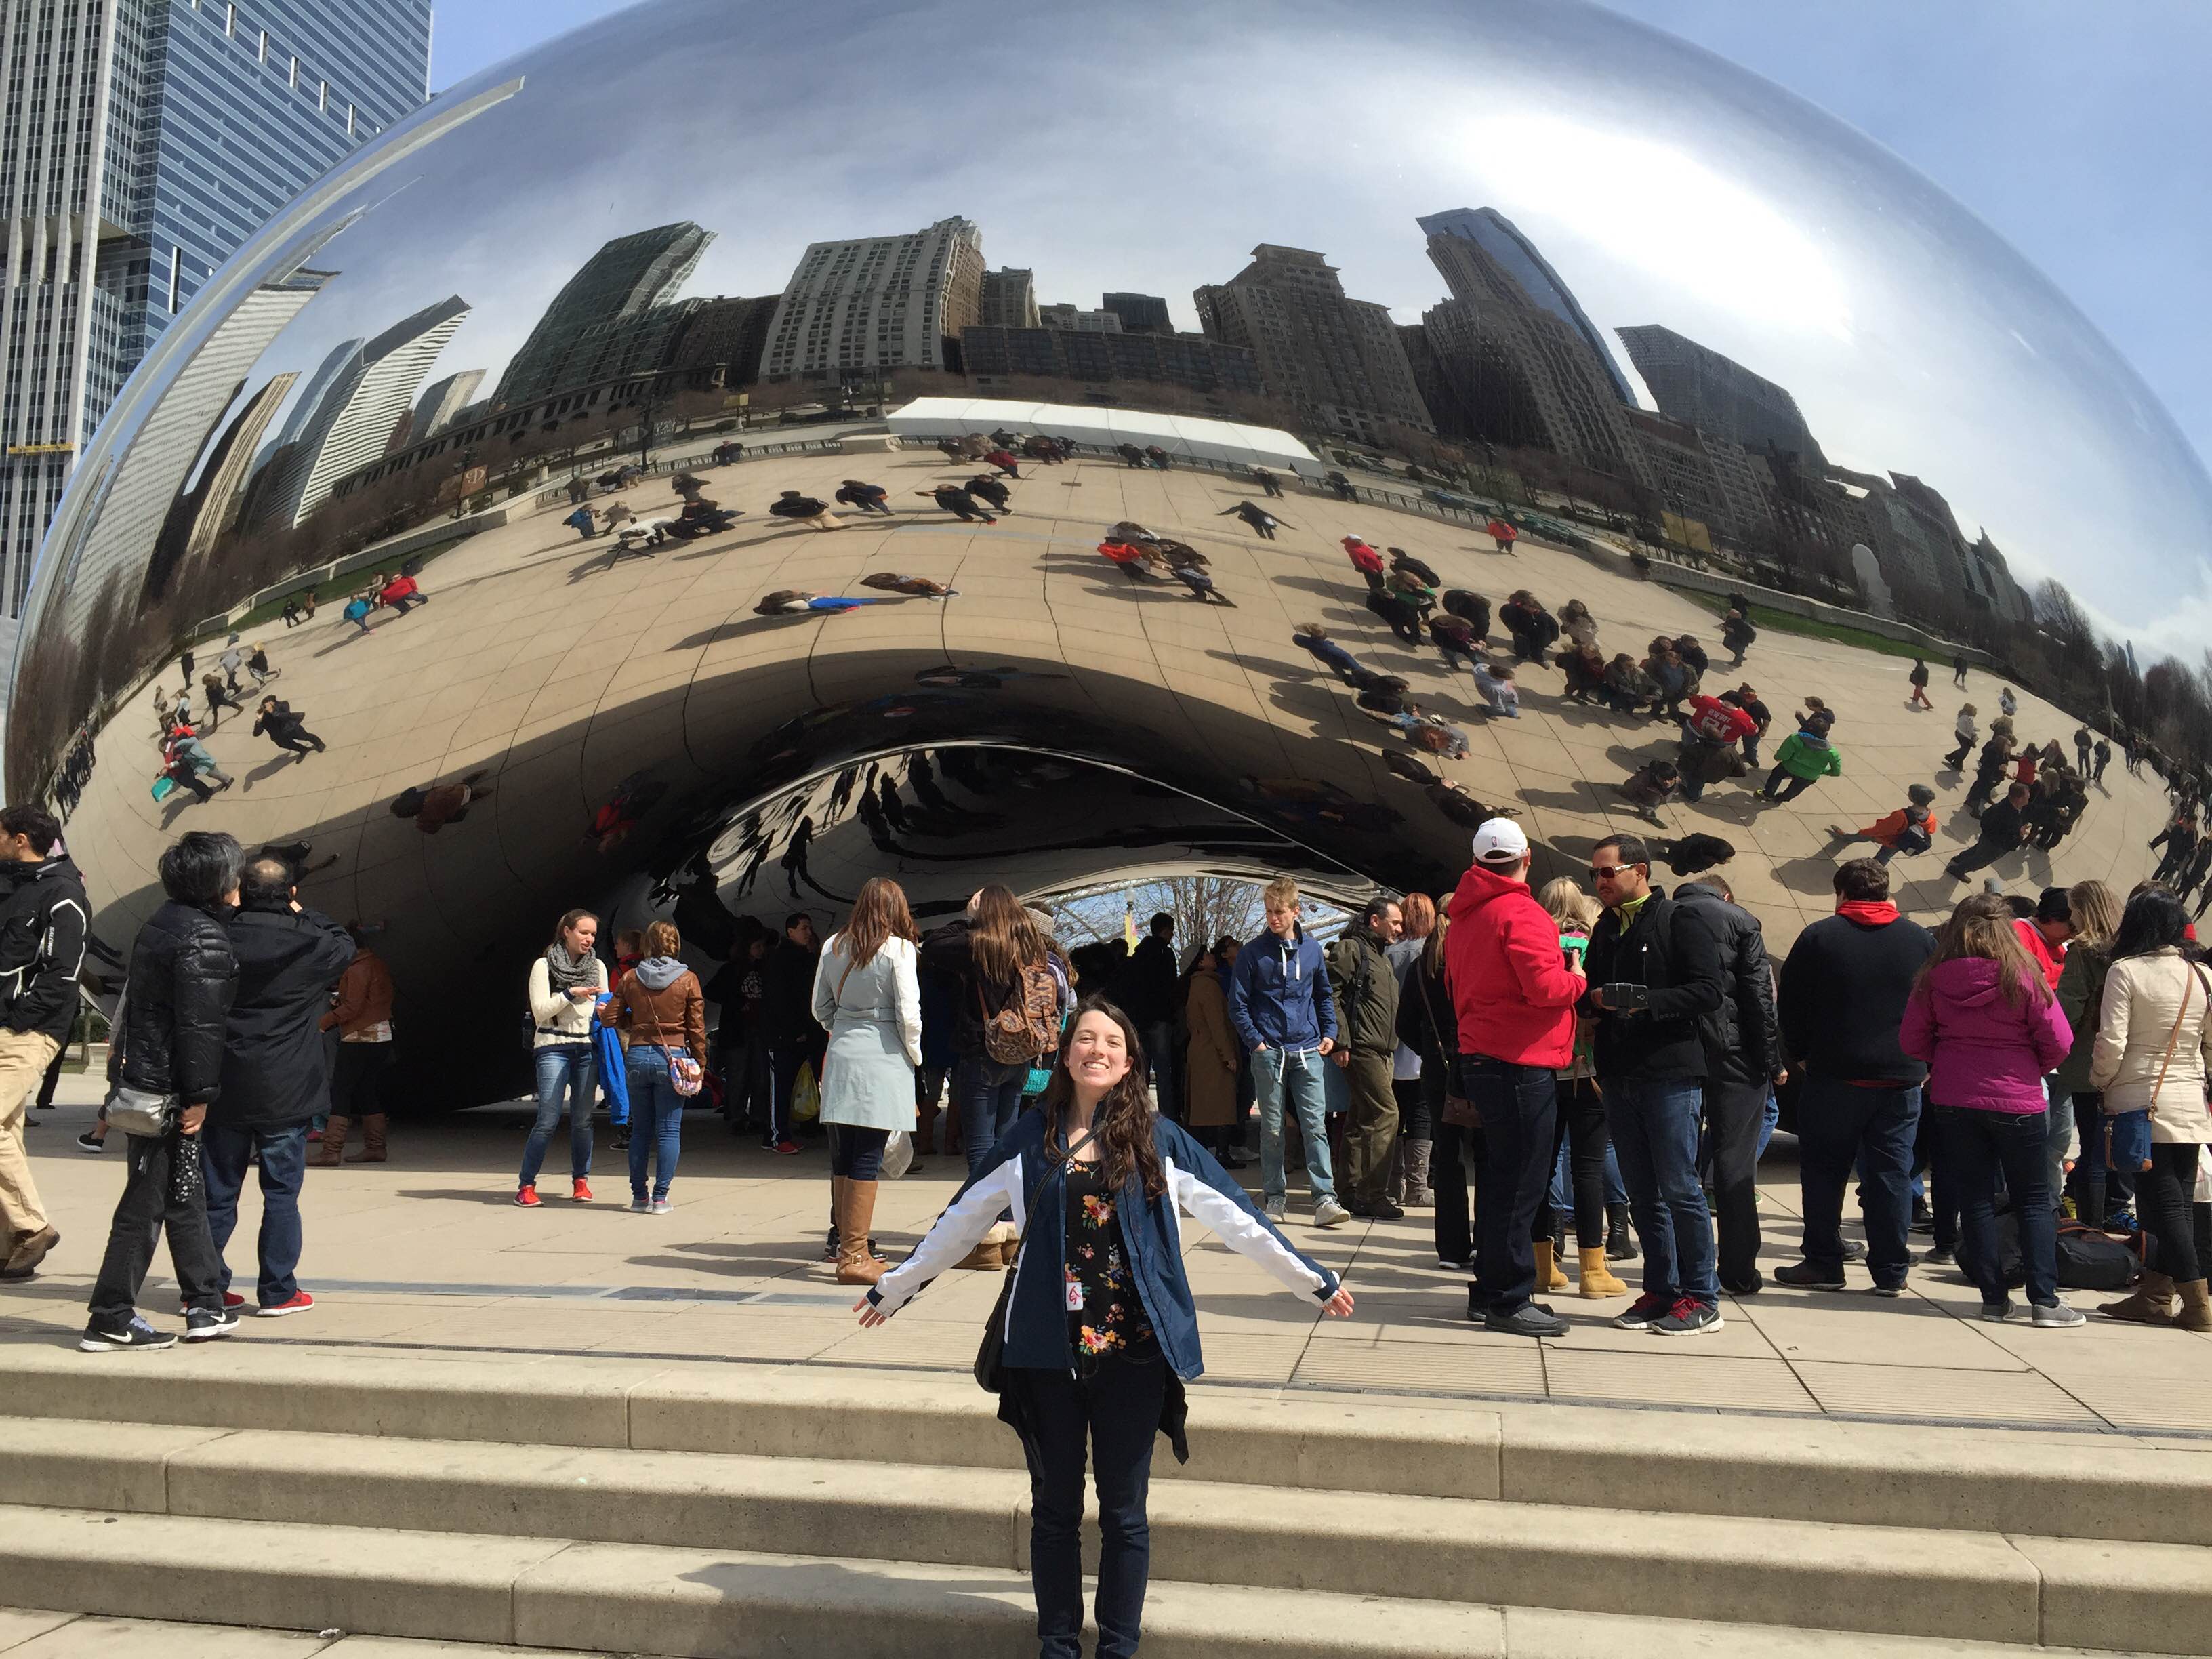 Me at my favorite place: the Bean! I will never get over how cool it is